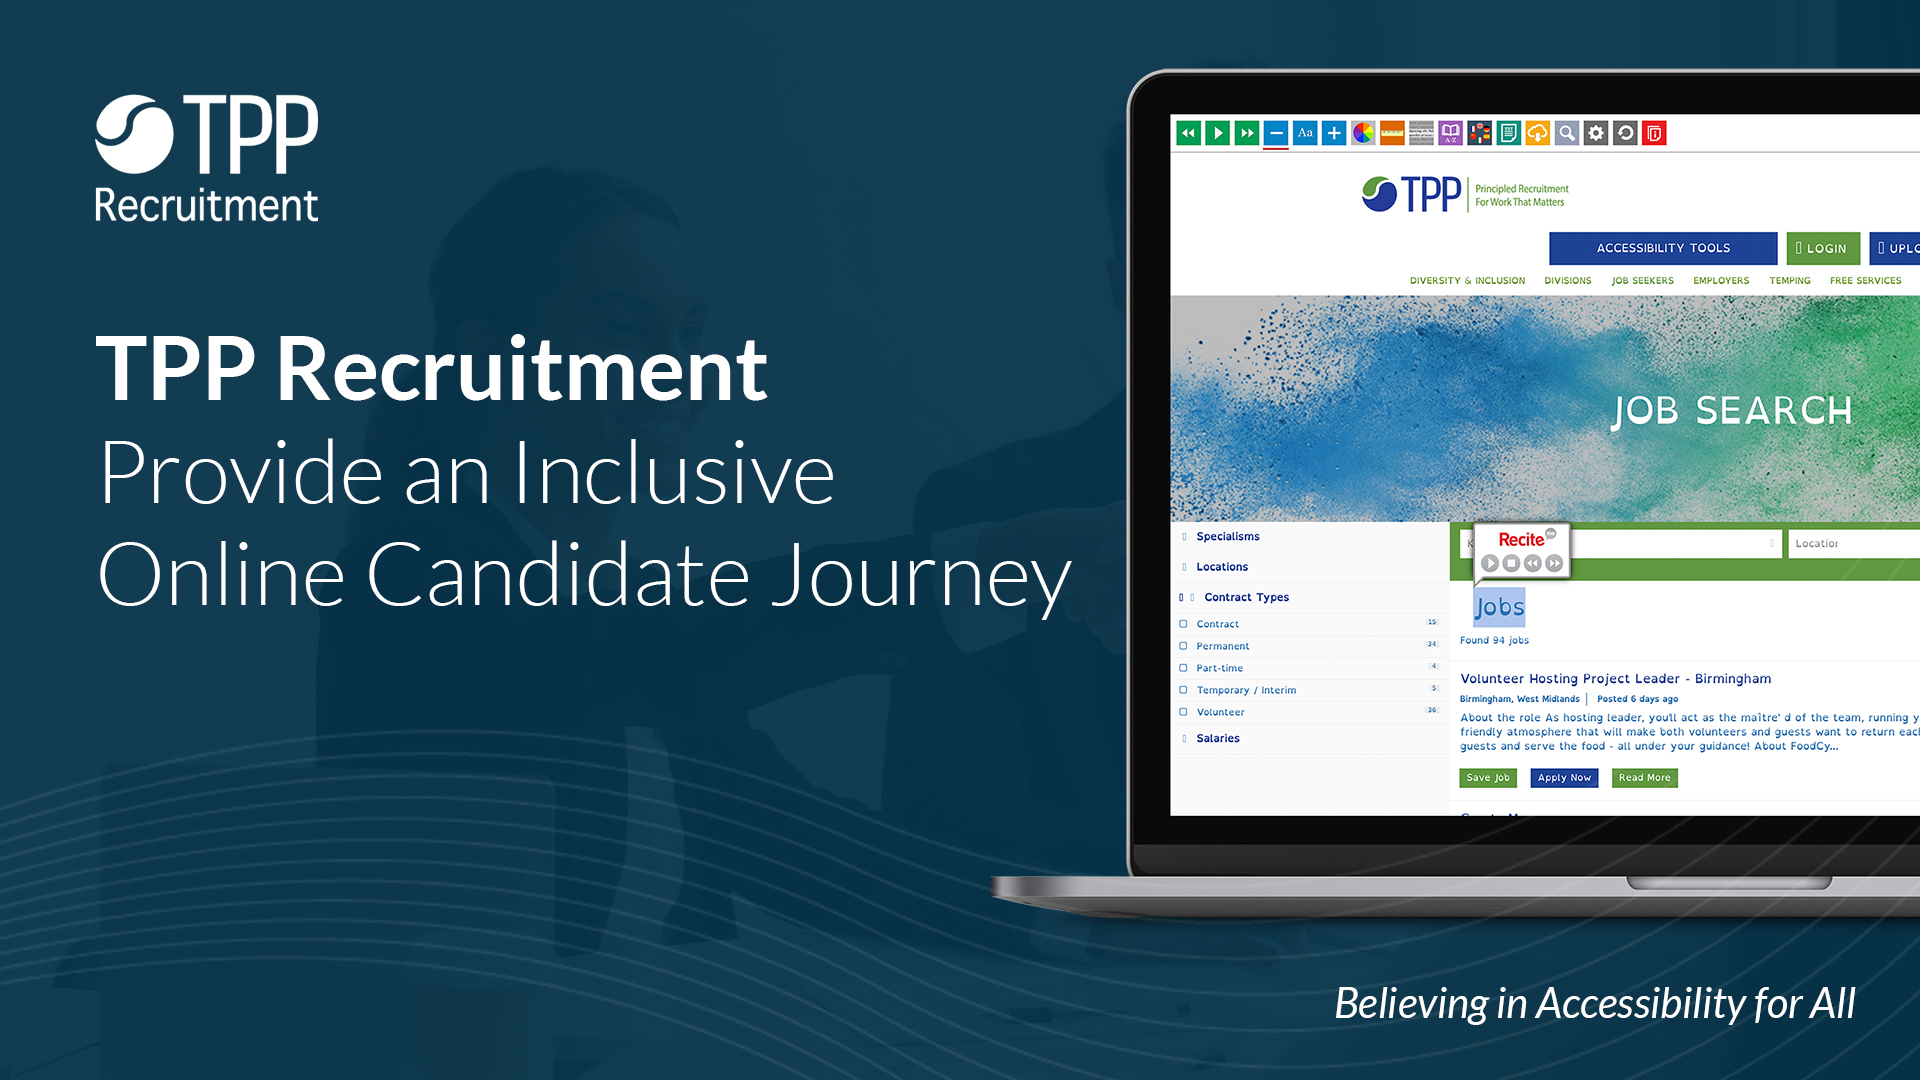 TPP Recruitment Provide an Inclusive Candidate Journey